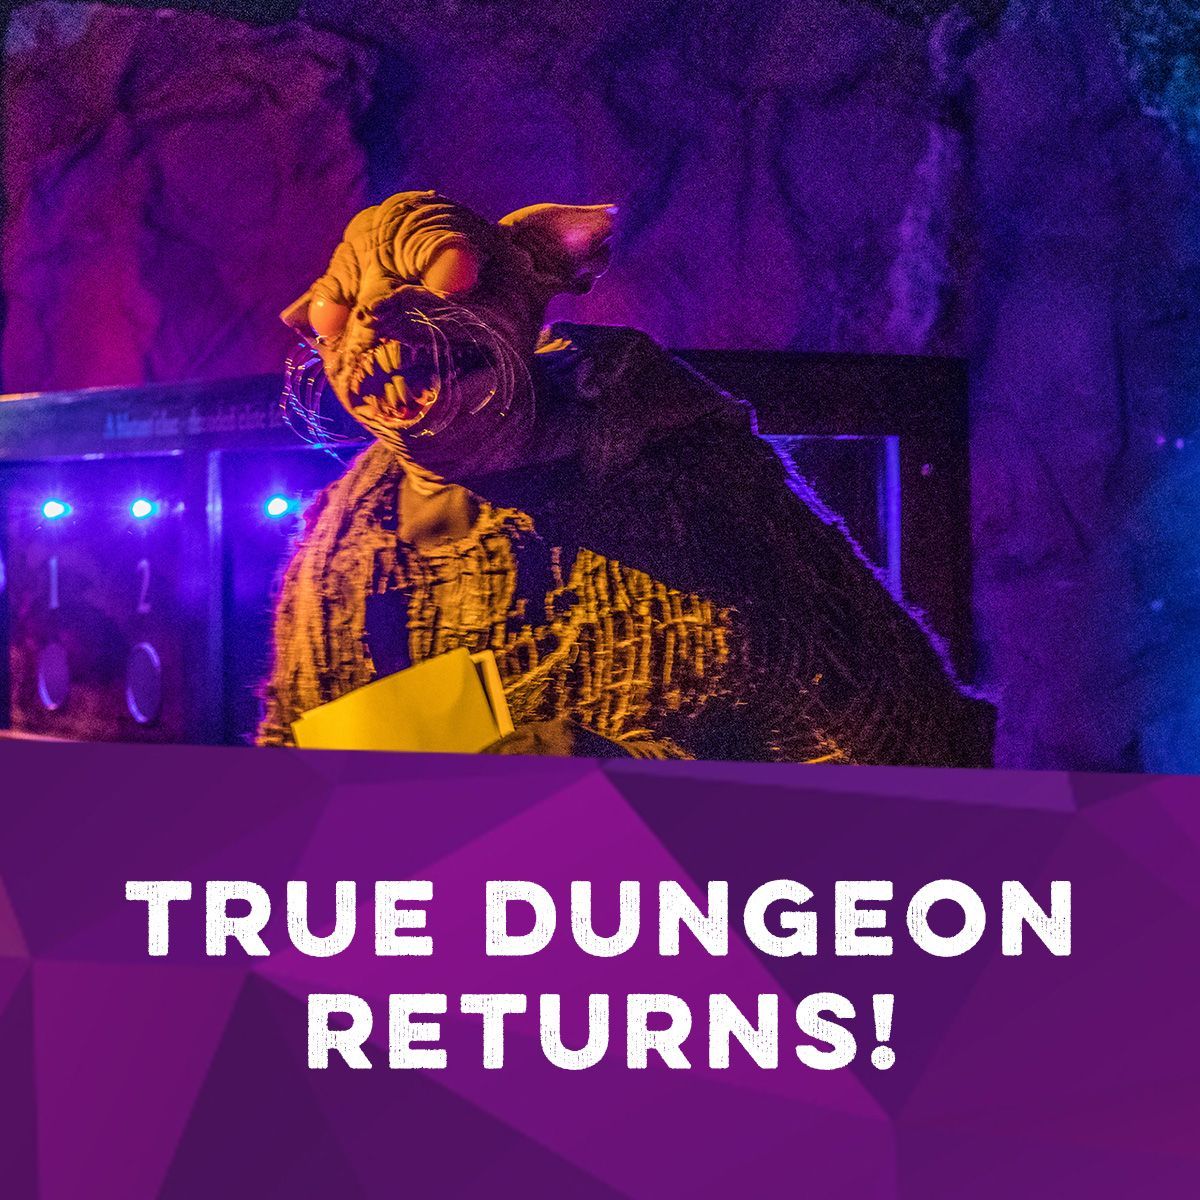 True Dungeon returns to #OriginsGameFair ! Learn more: buff.ly/3v7M6nH